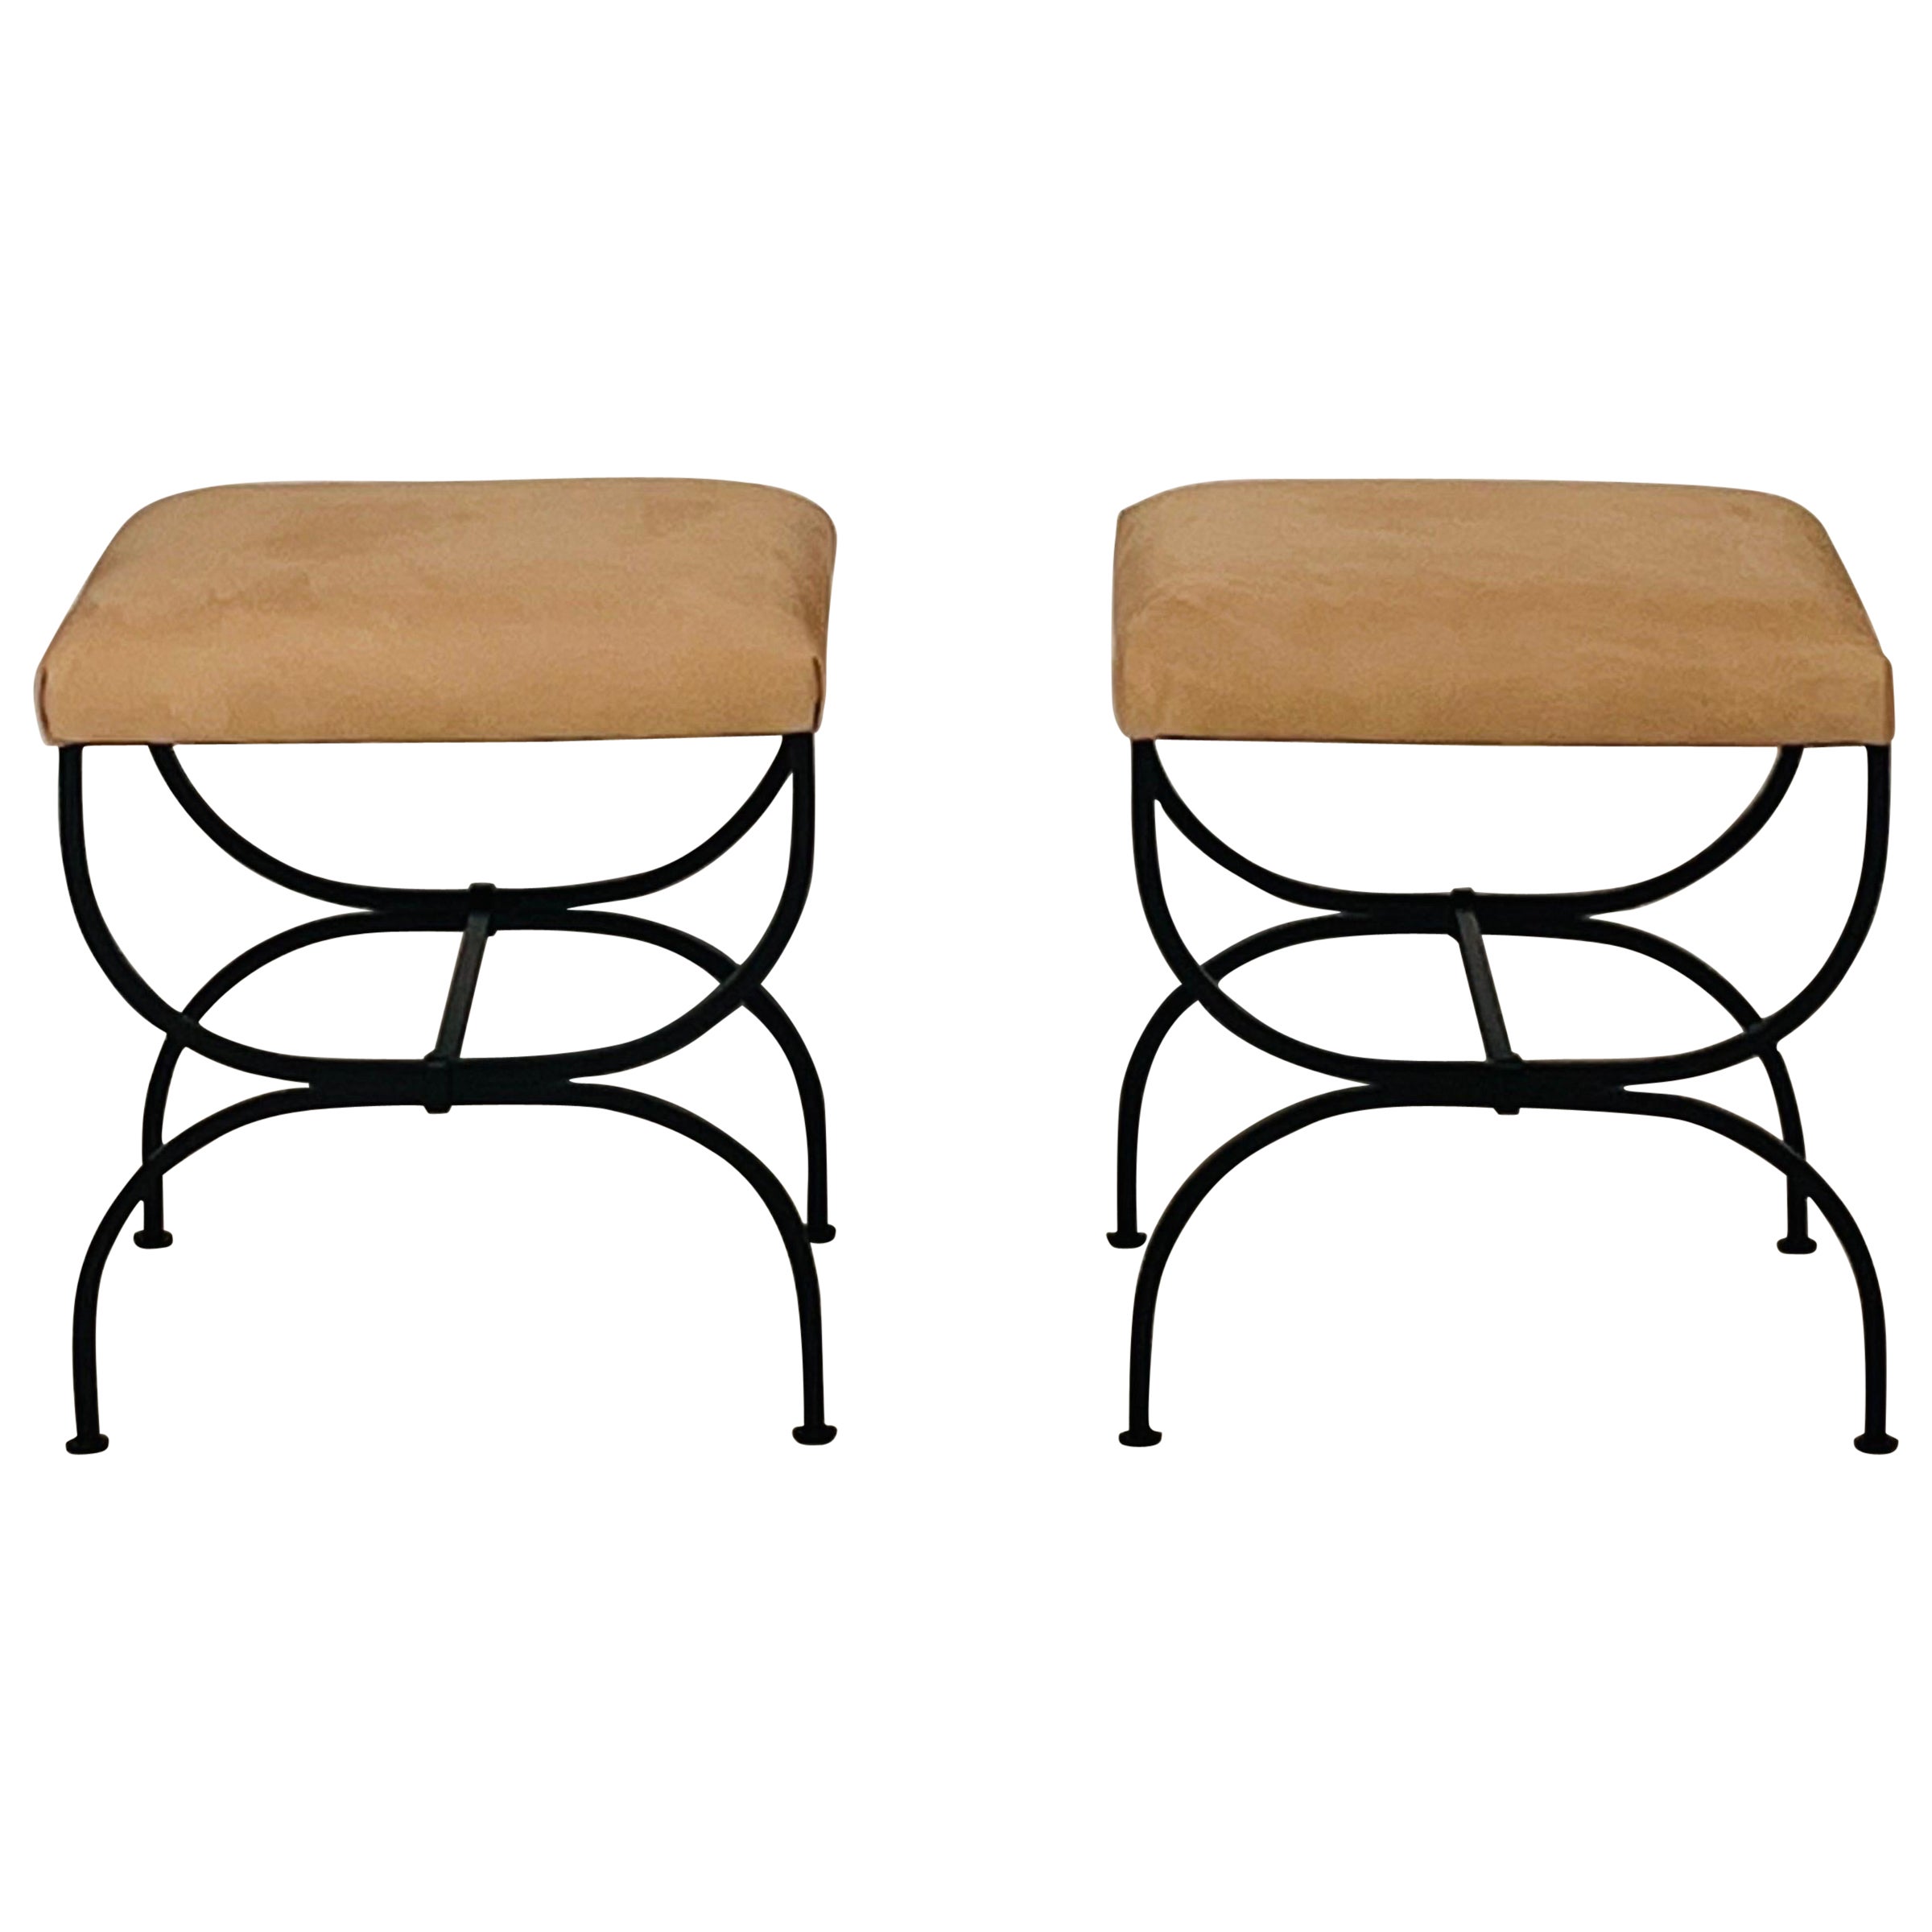 Pair of 'Strapontin' Stools in Cognac Nubuck Leather by Design Frères For Sale